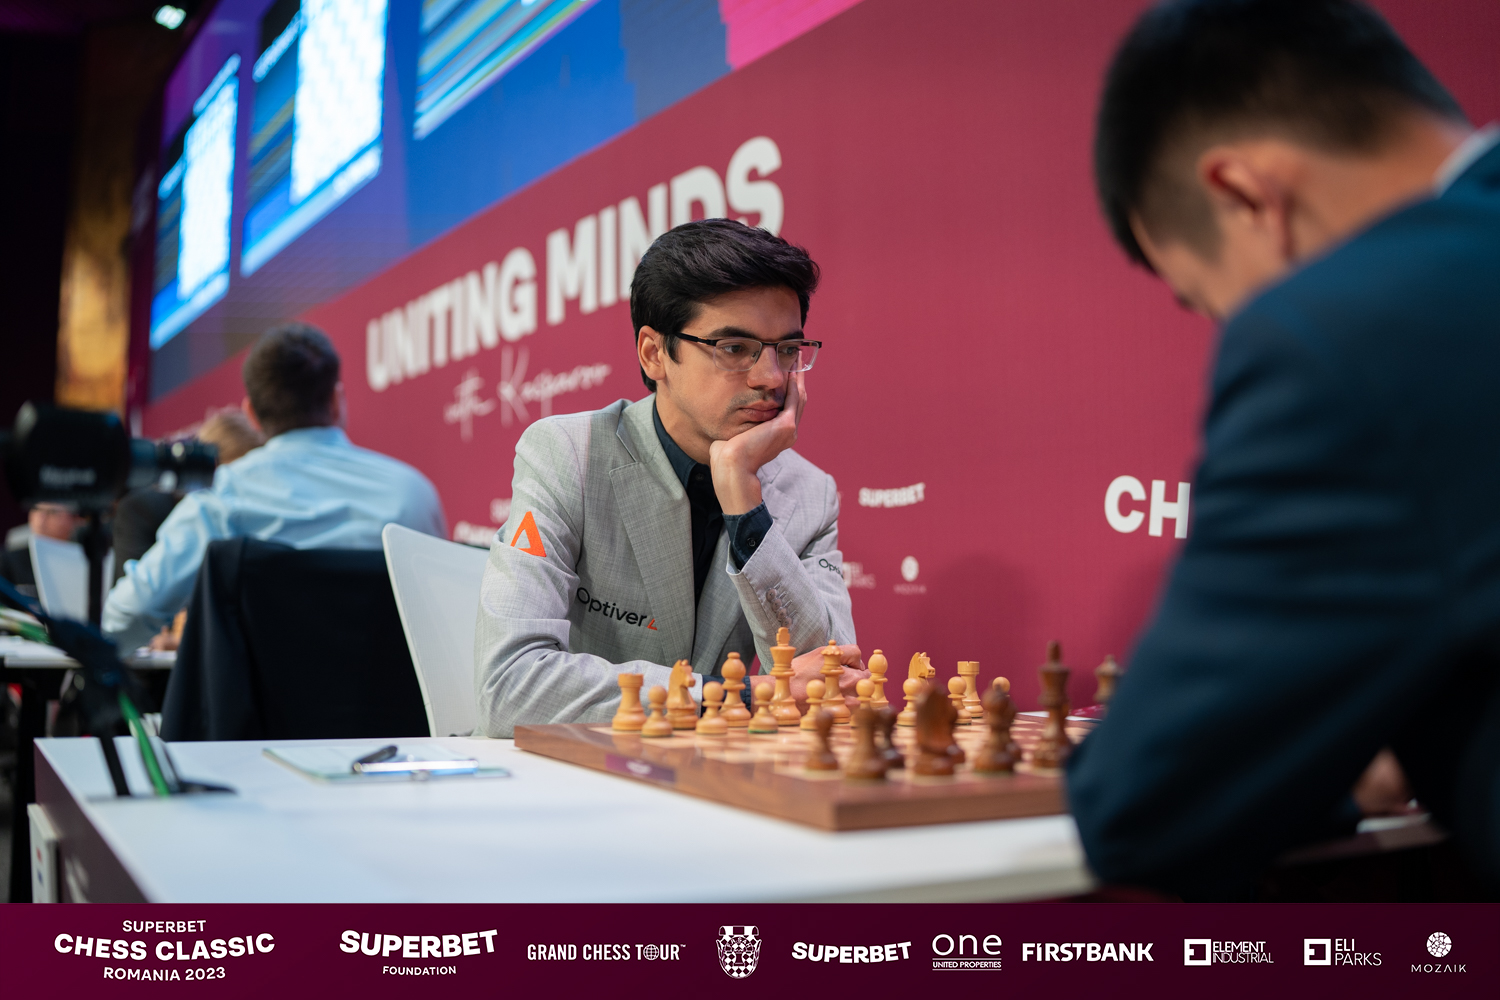 Two rounds, two victories in the Bucharest stage of the Grand Chess